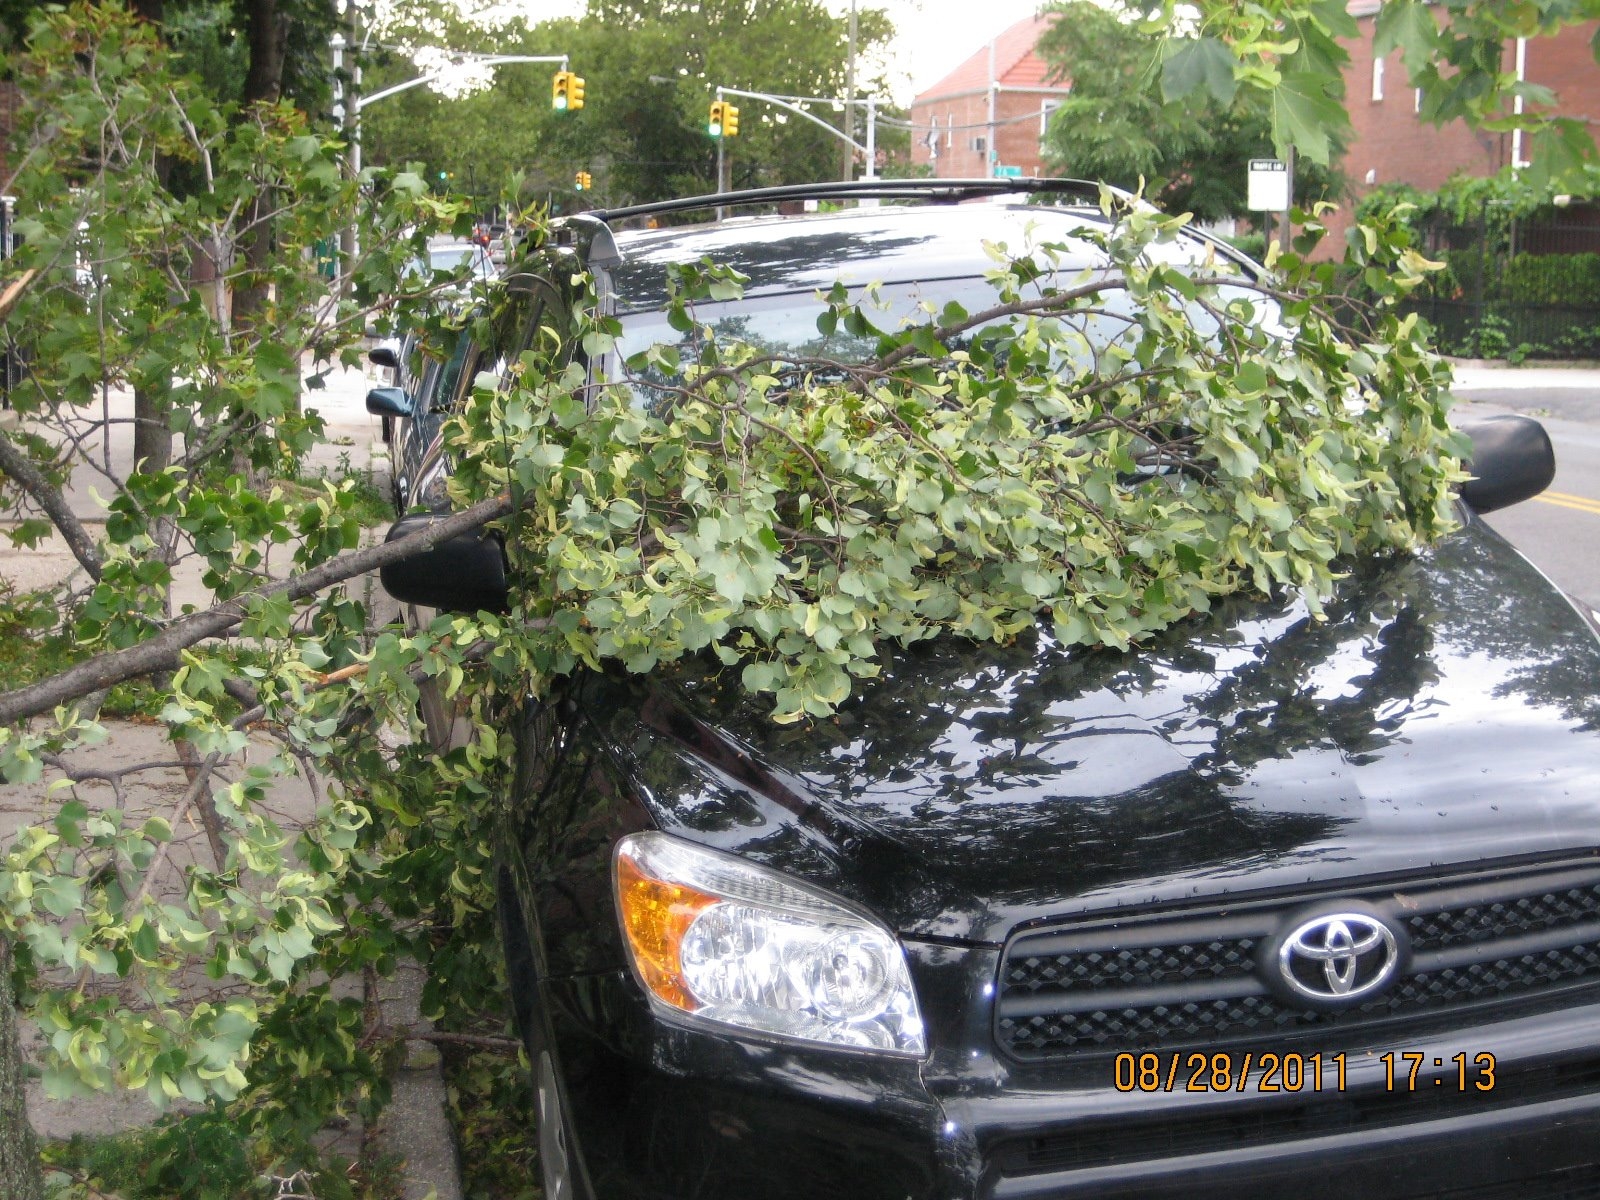 tree-limbs-down-on-a-car-32nd-ave-77th-st-in-jackson-heights-queens-credit-facebook-fan-pic-by-allyson-forsythe.jpg 